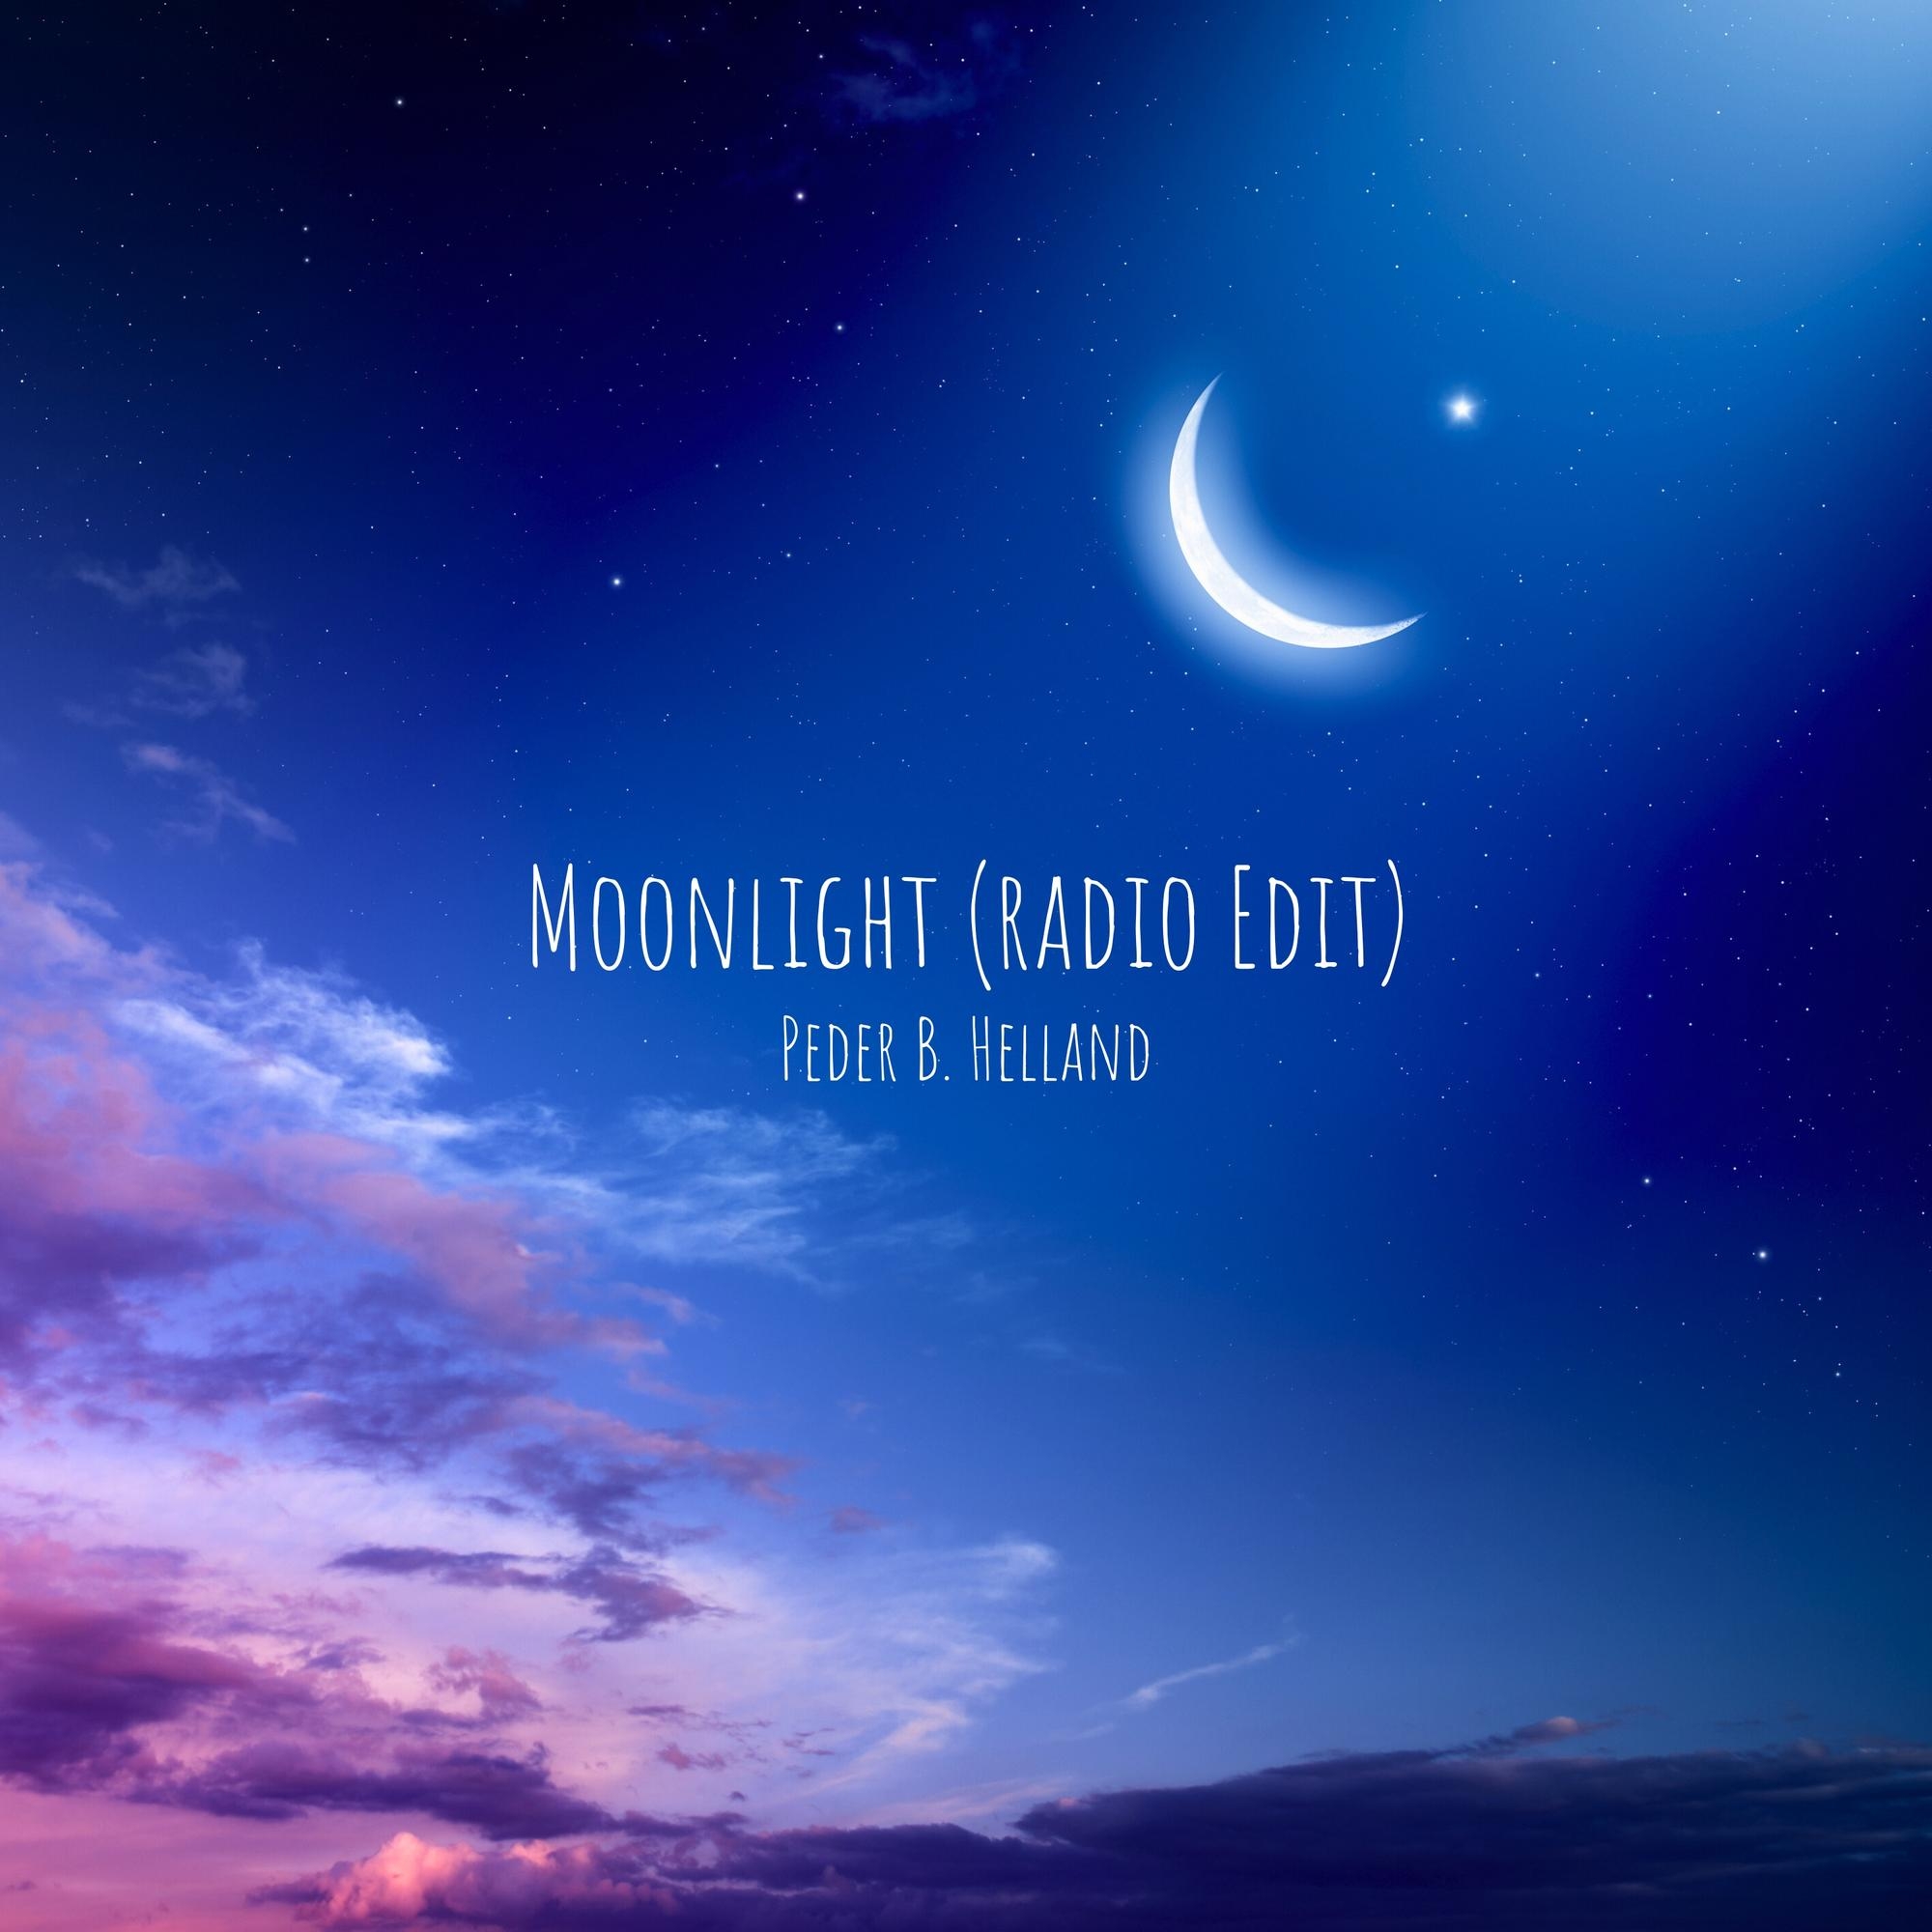 Cover art for the single Moonlight (Radio Edit) by Peder B. Helland